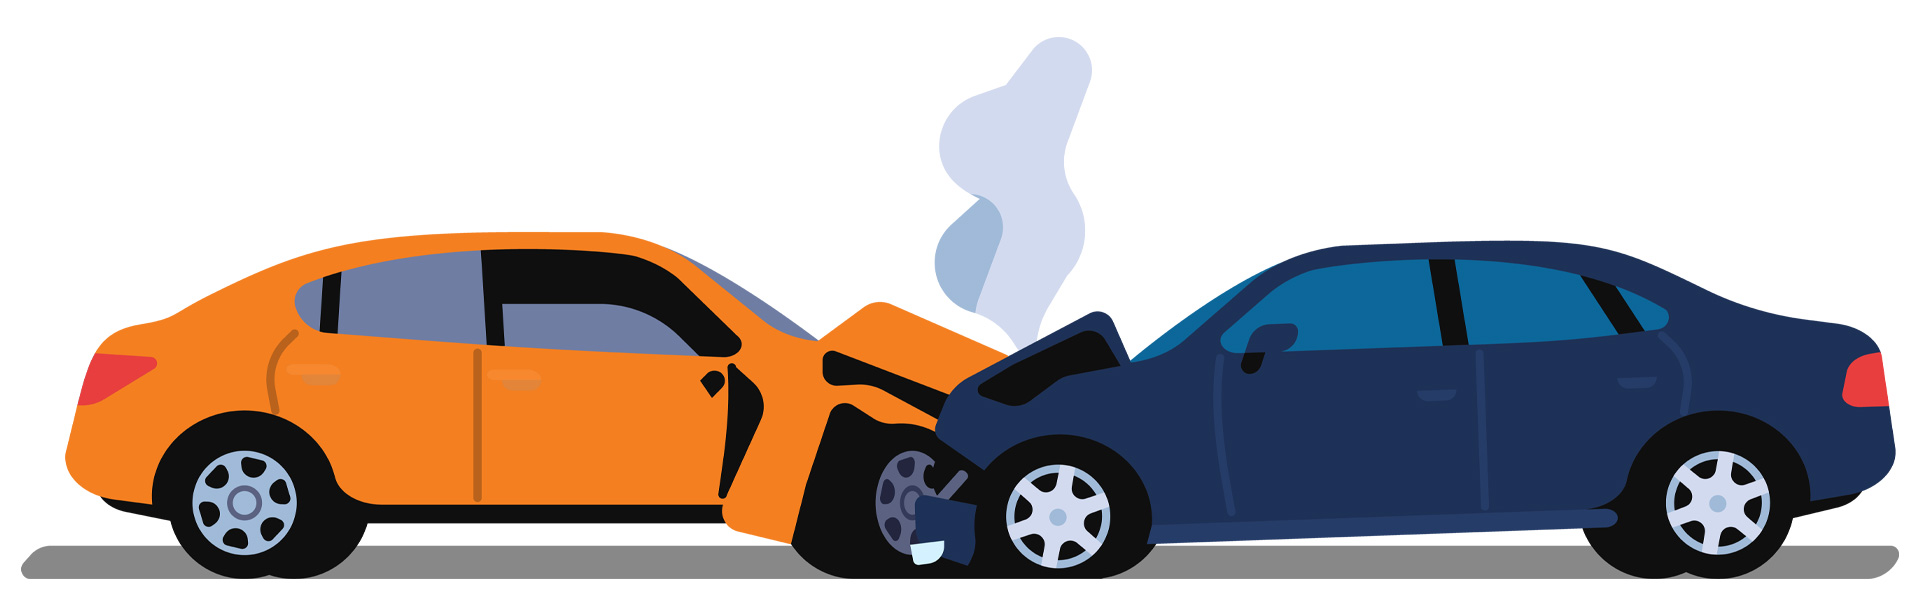 An illustration of an orange vehicle and a blue vehicle that had a head-on collision car accident